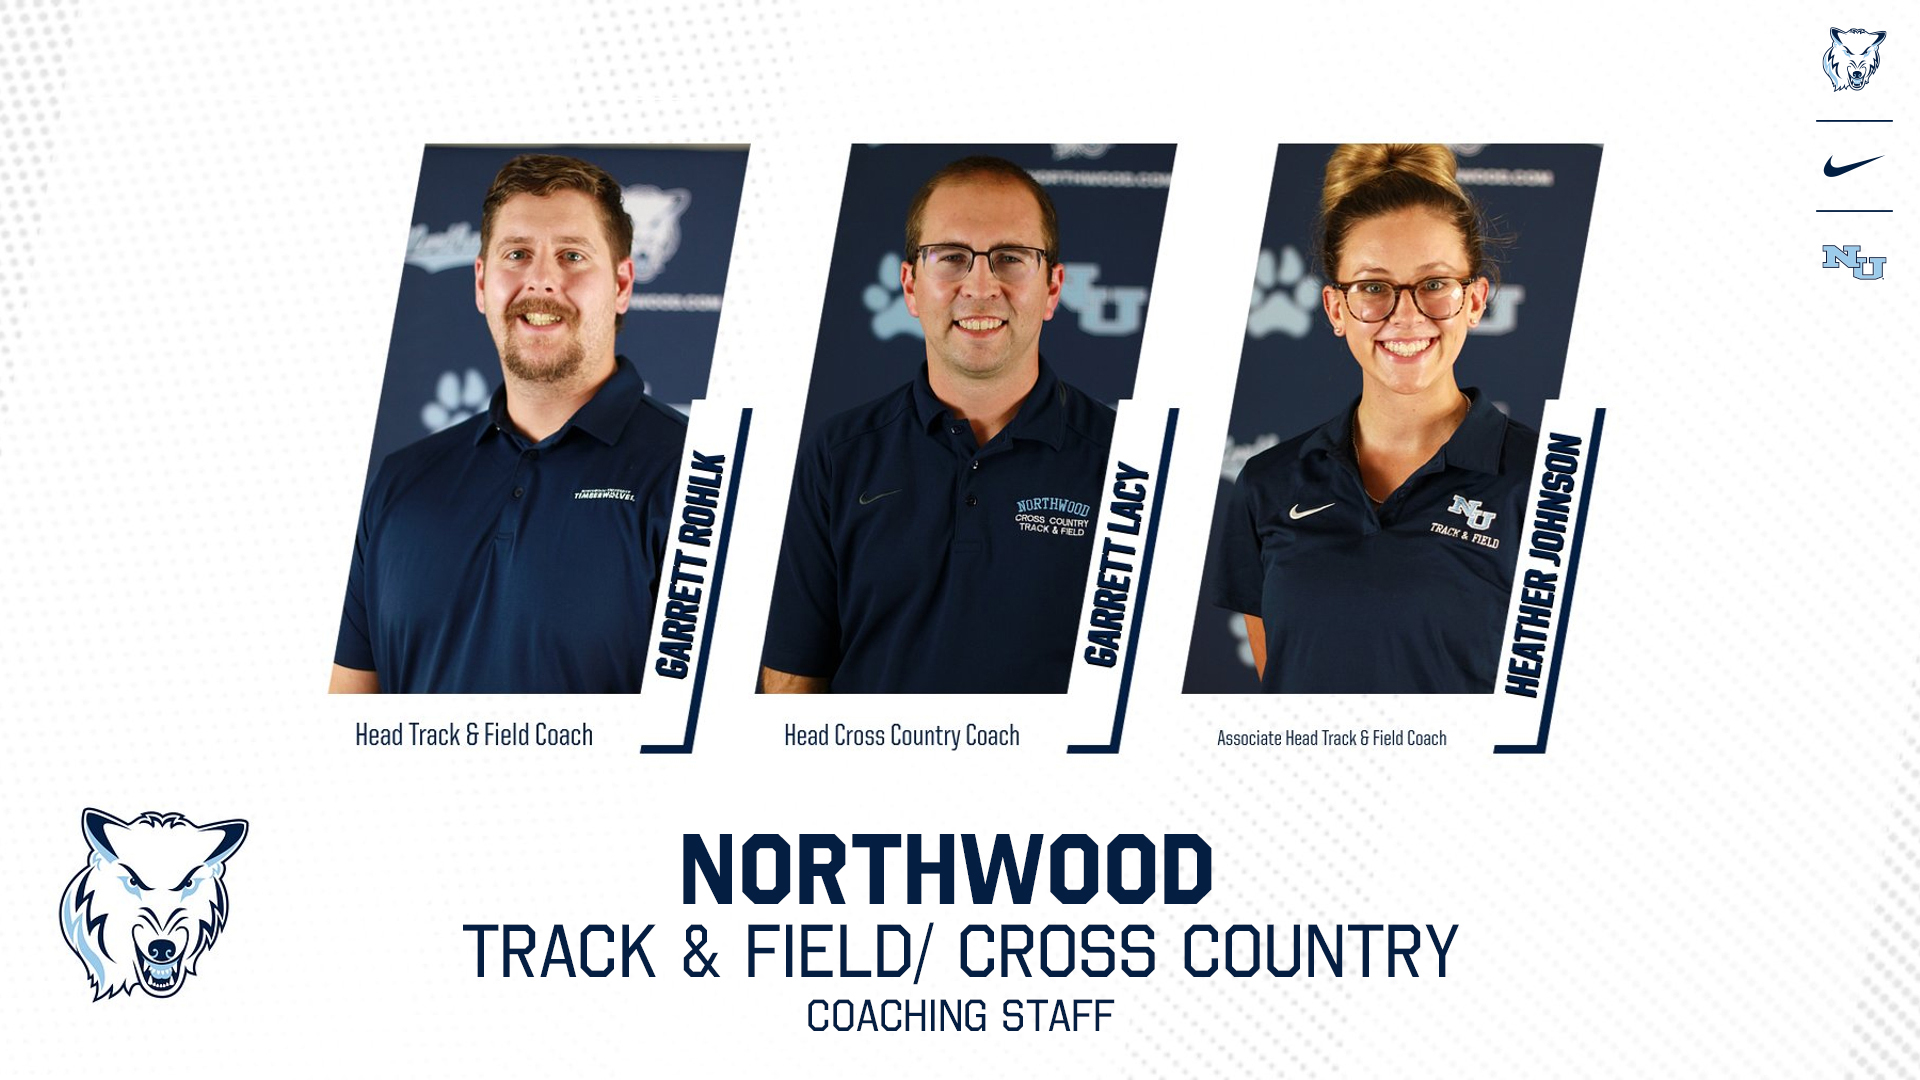 Northwood Athletics Announces Track &amp; Field/ Cross Country Coaching Staff Promotions